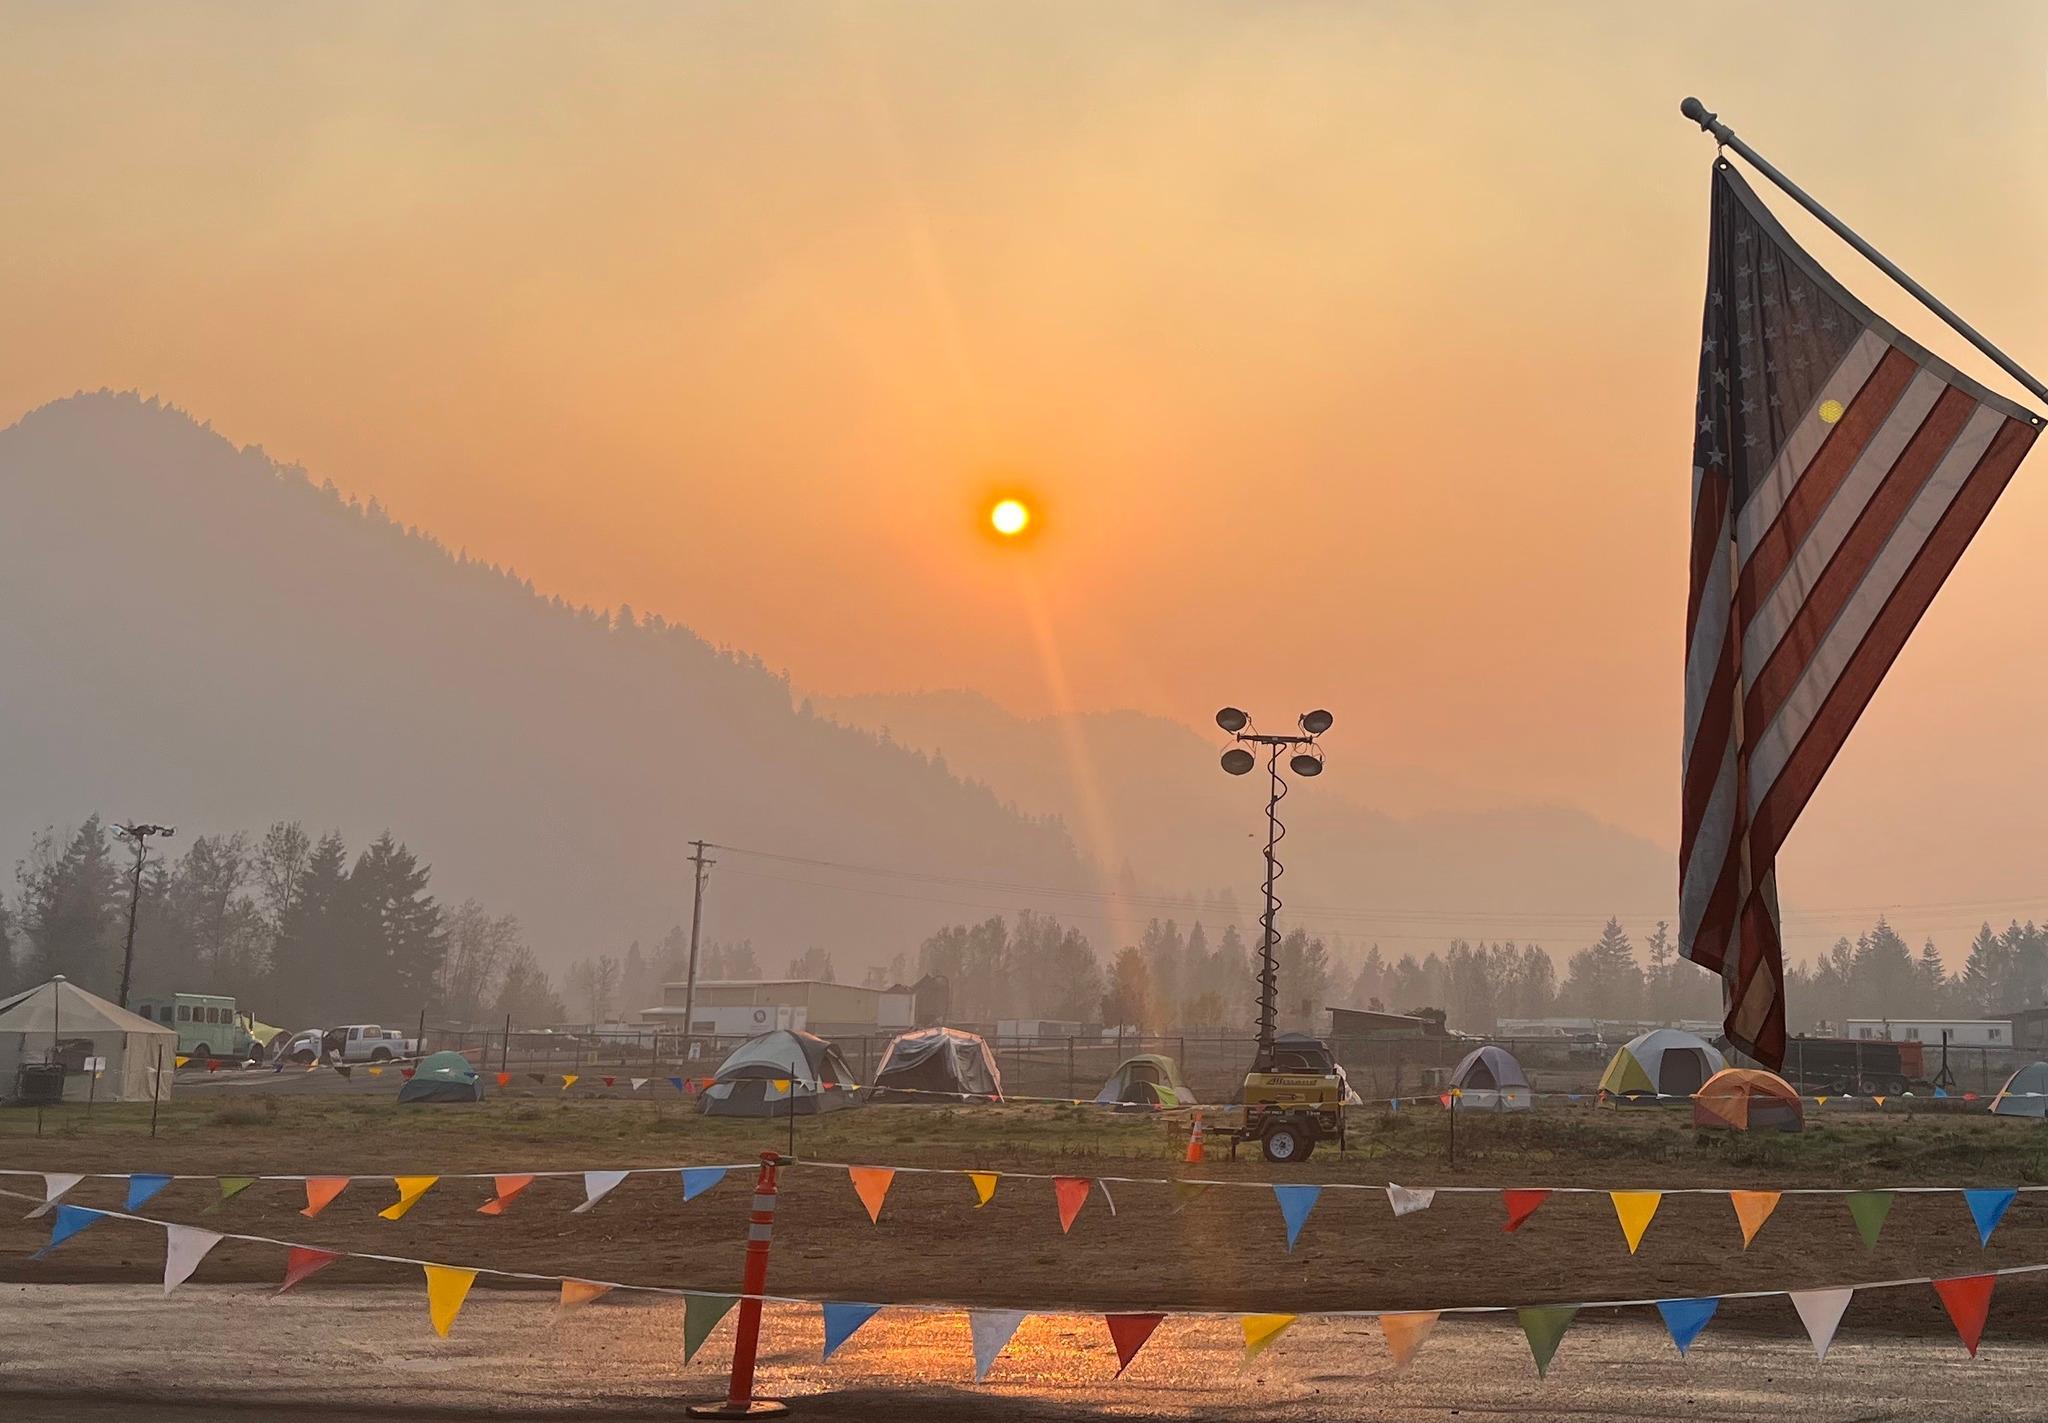 View from the command post has American flag in the foreground, camping tents and vehicles while the orange sun rises above the mountains and smokey haze in the air.